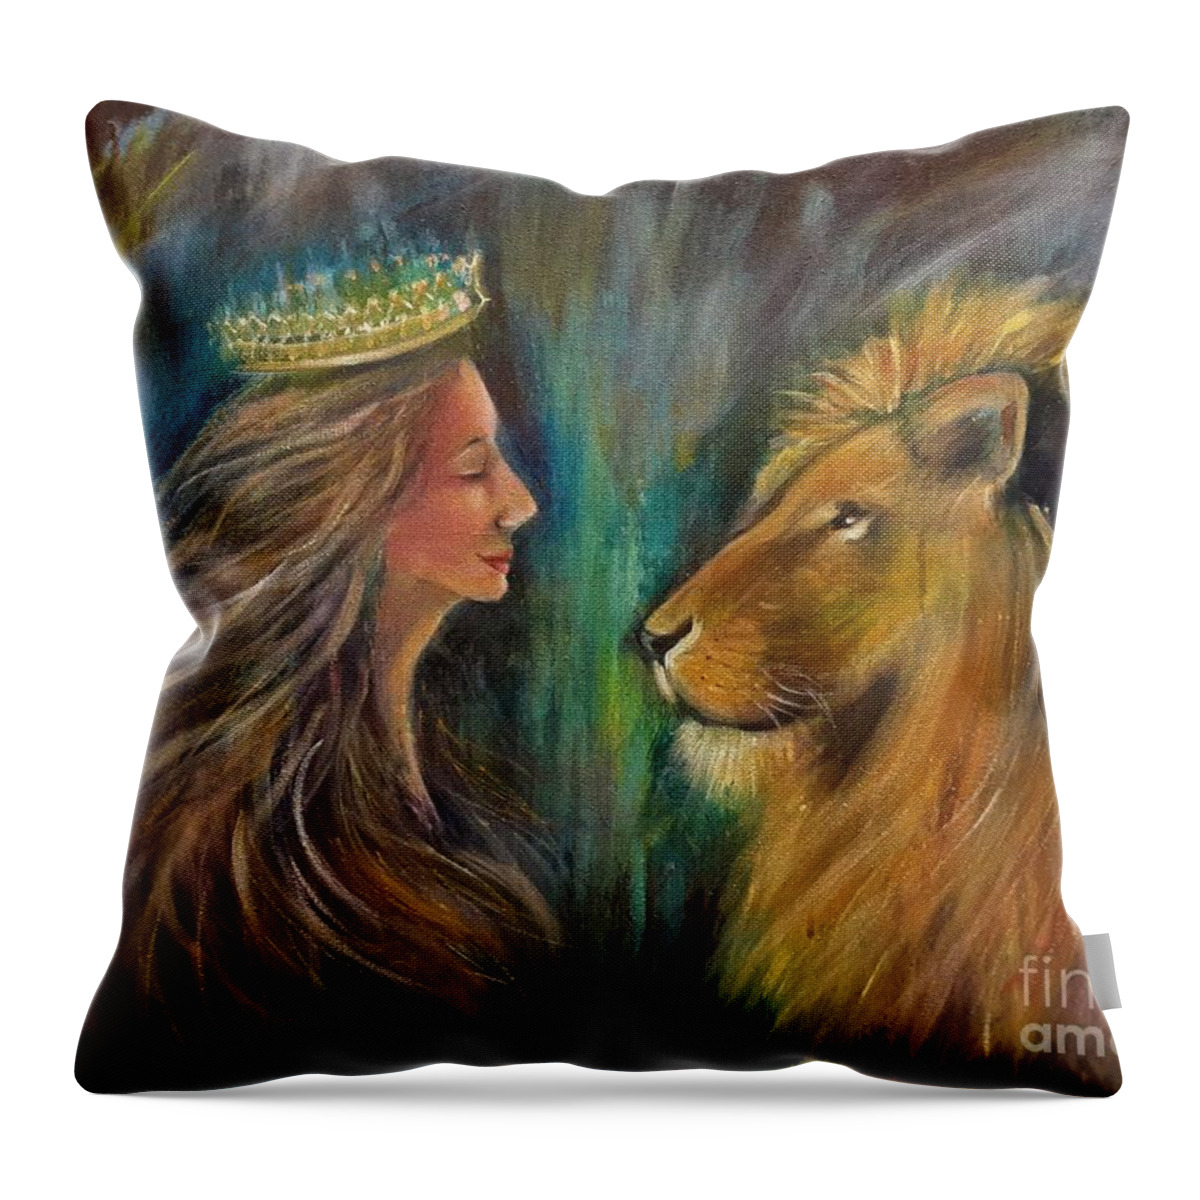 Lion Throw Pillow featuring the mixed media Face To Face by Deborah Nell